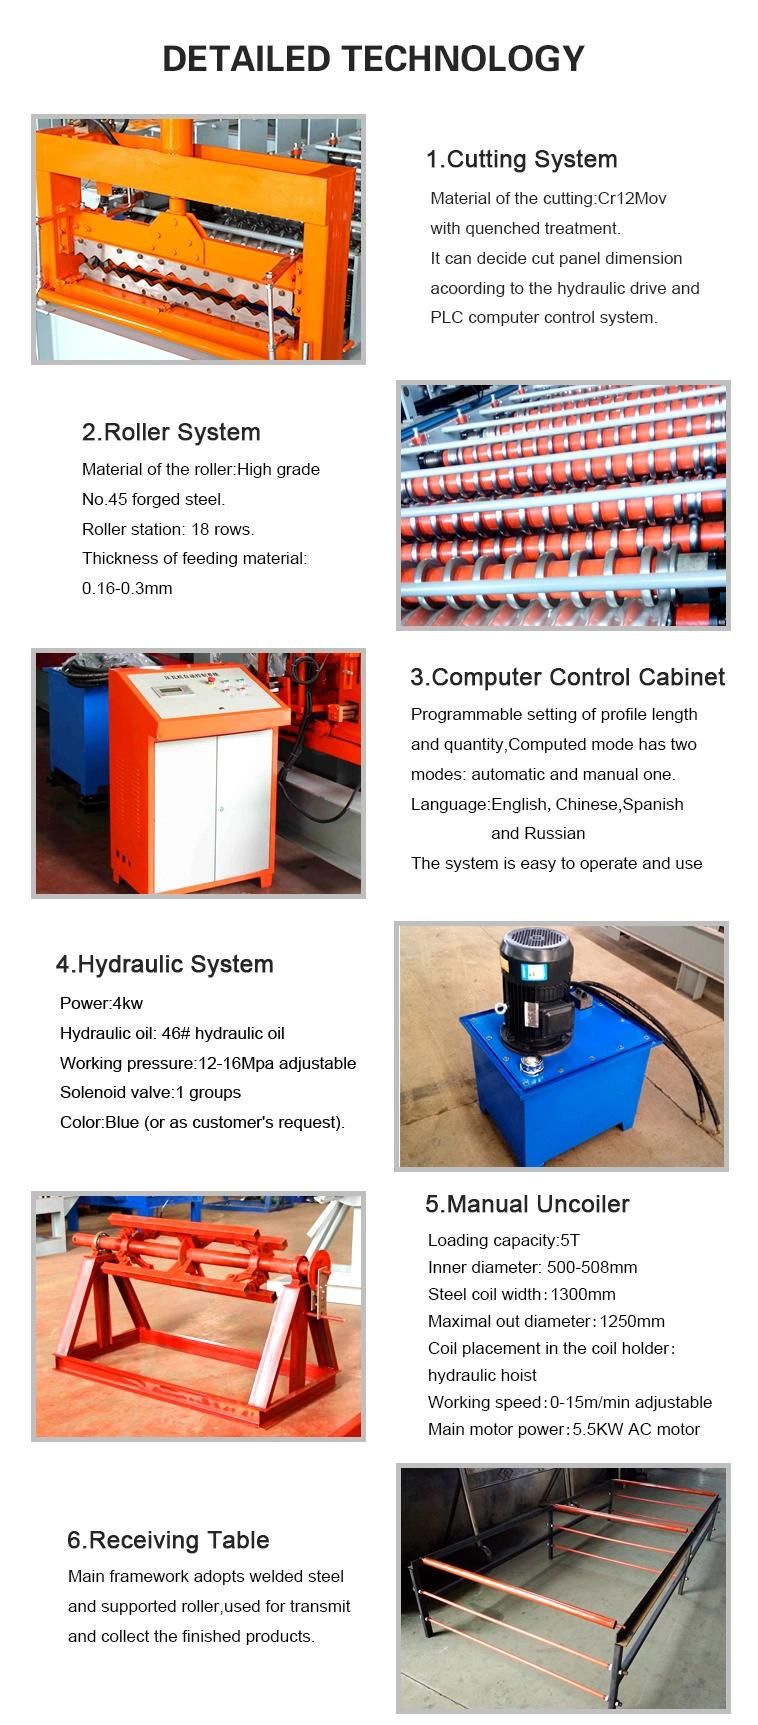 Door to Roof Corrugated Metal Sheet Roll Forming Machine with CE